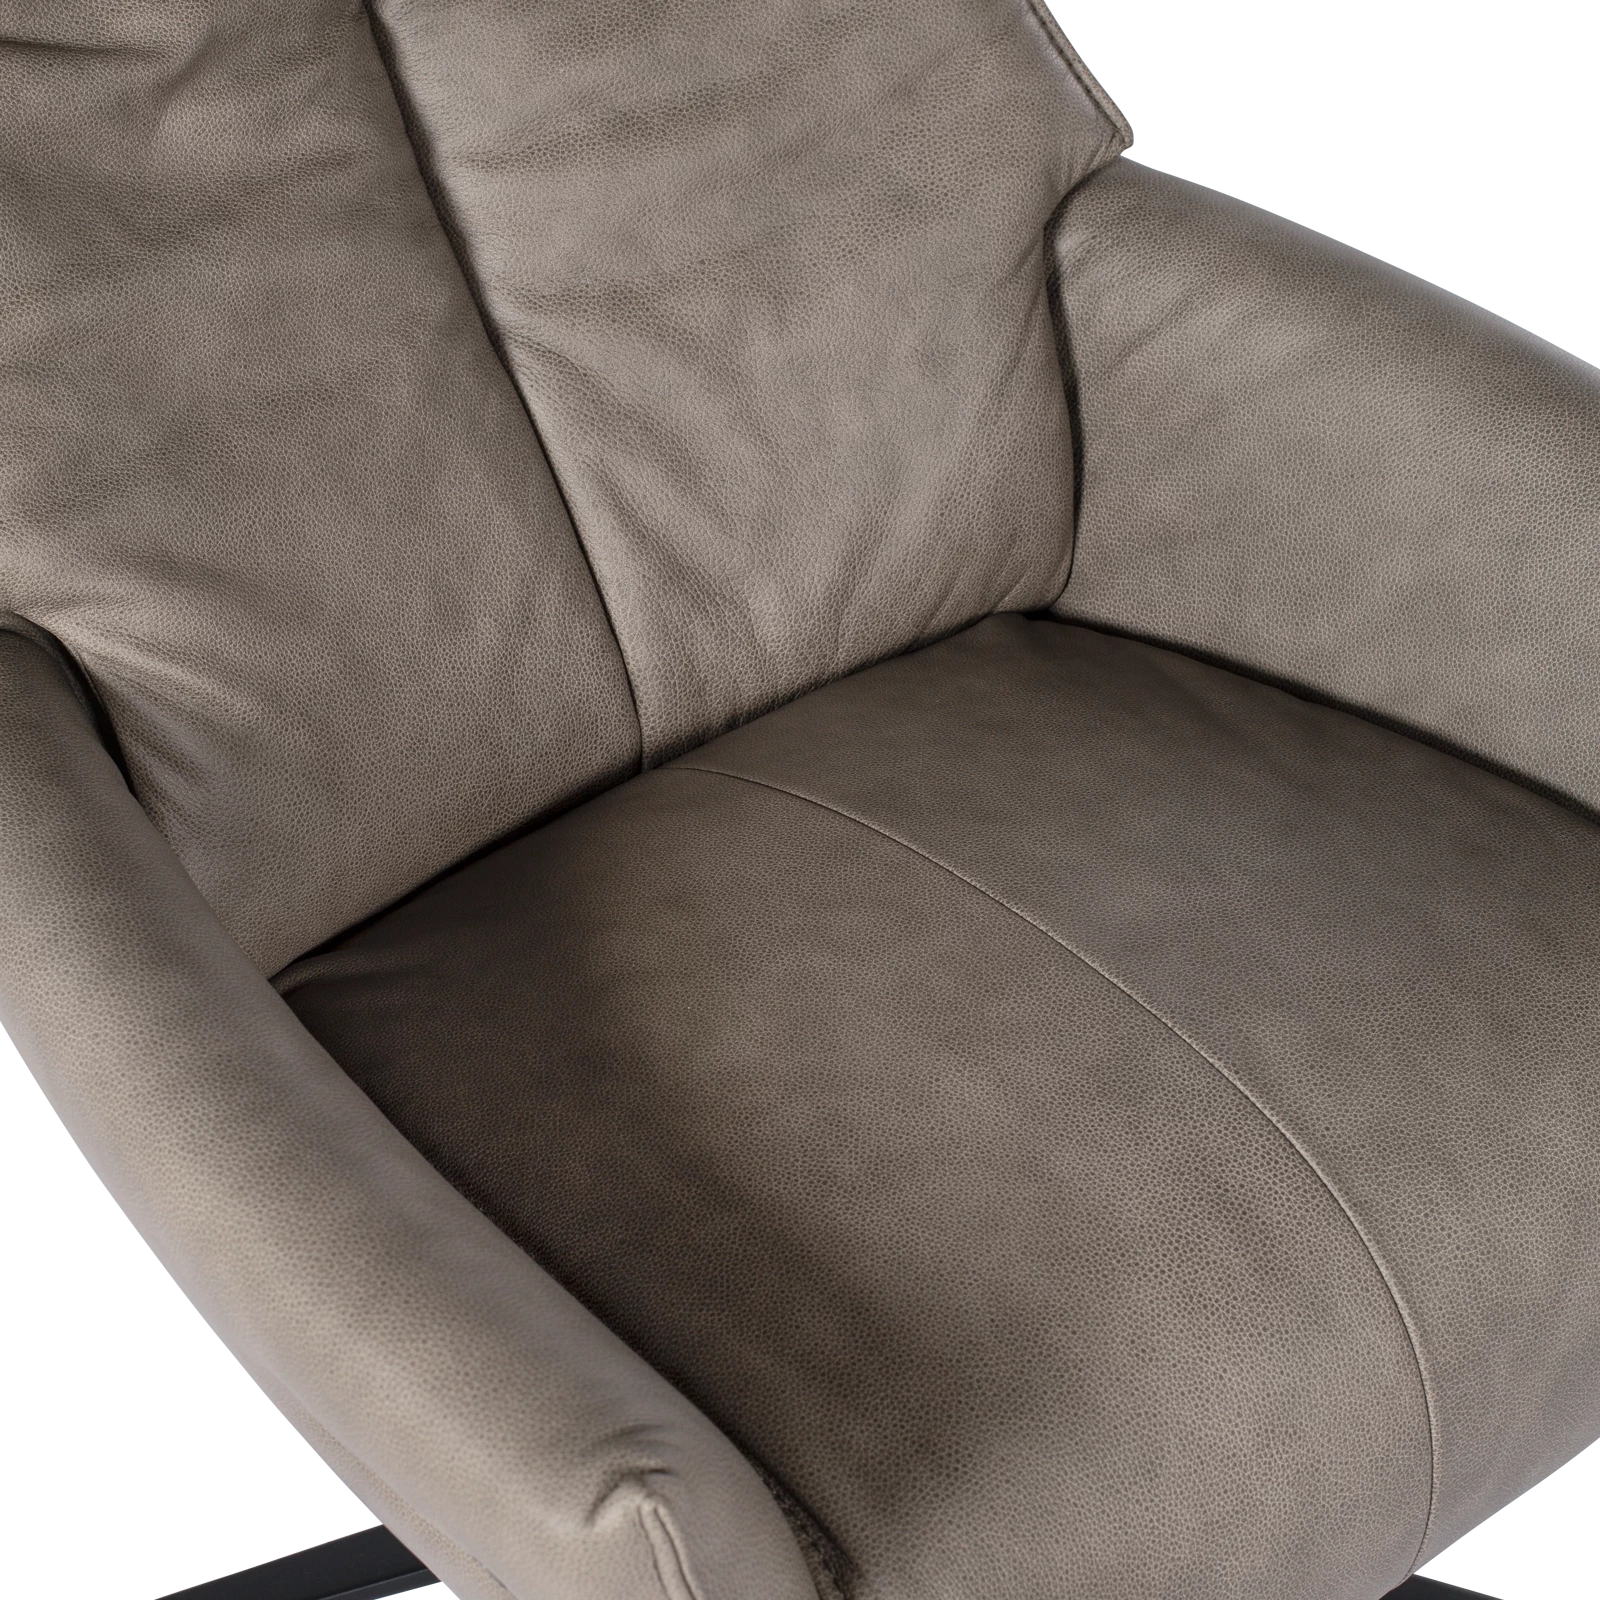 Relaxfauteuil (large) Grant - Nevada Taupe